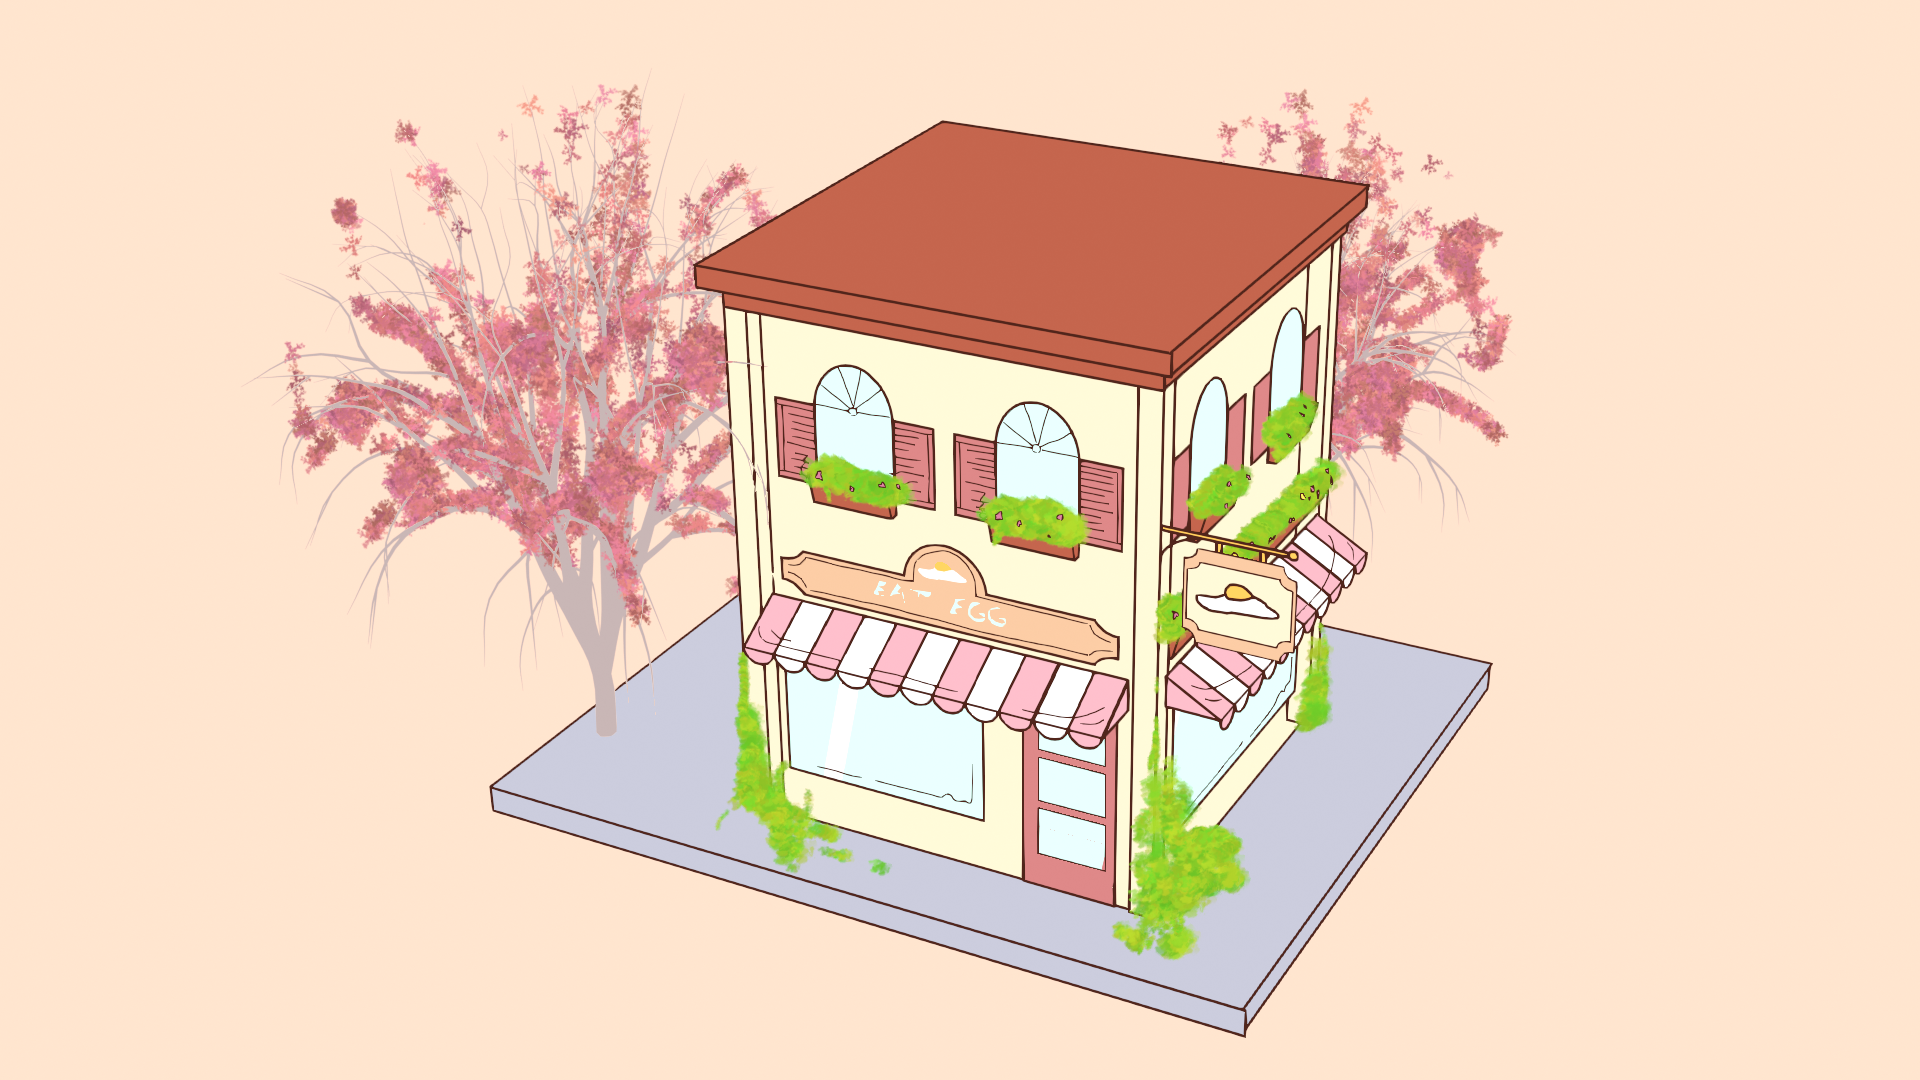 2.5d restaurant with pink trees